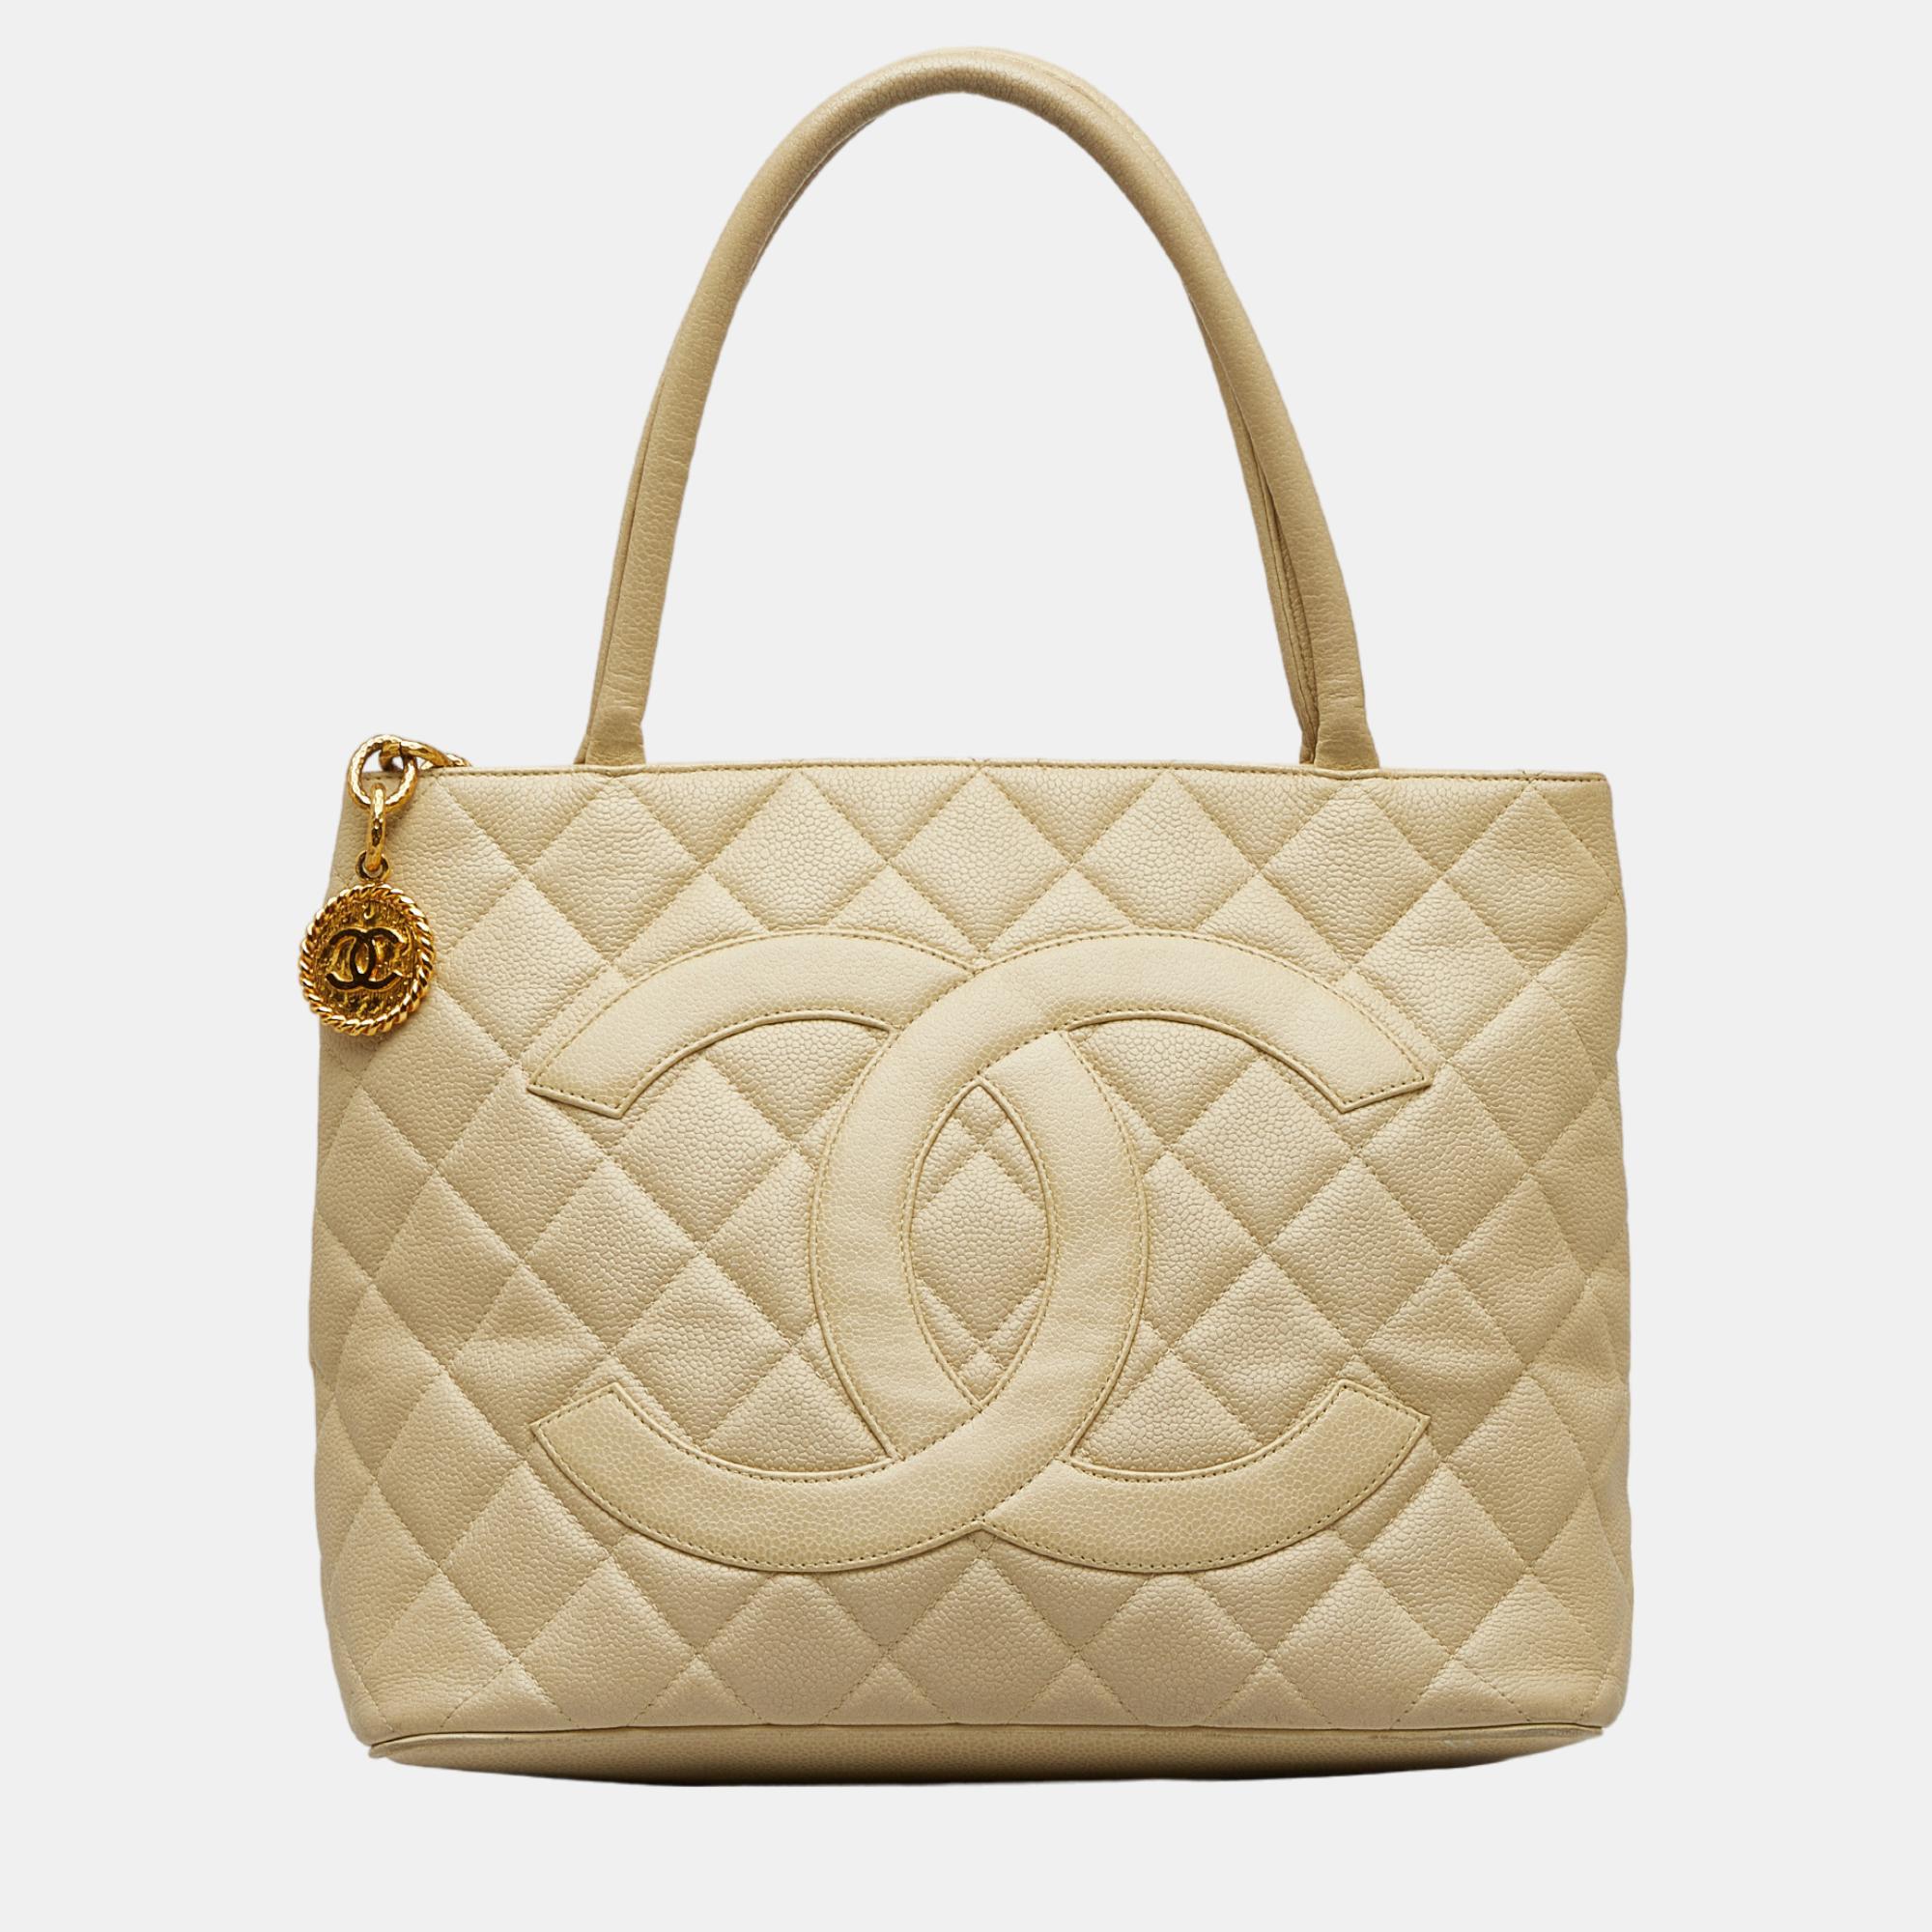 The Medallion tote bag features a quilted caviar leather body rolled leather handles a top zip closure an exterior back slip pocket and interior zip and slip pockets.